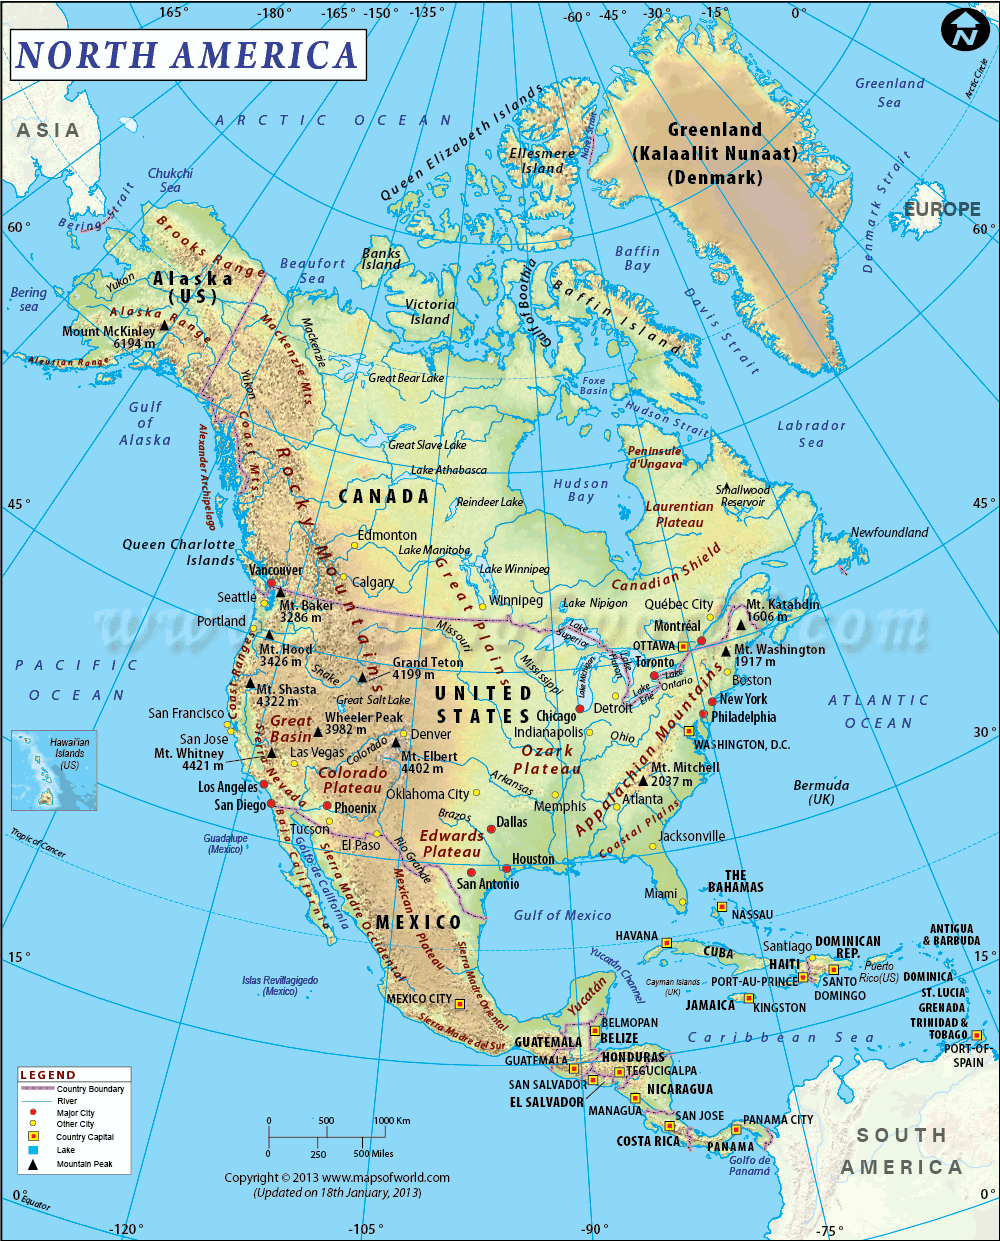 North America Continent Countries & Capitals,Currency with Code